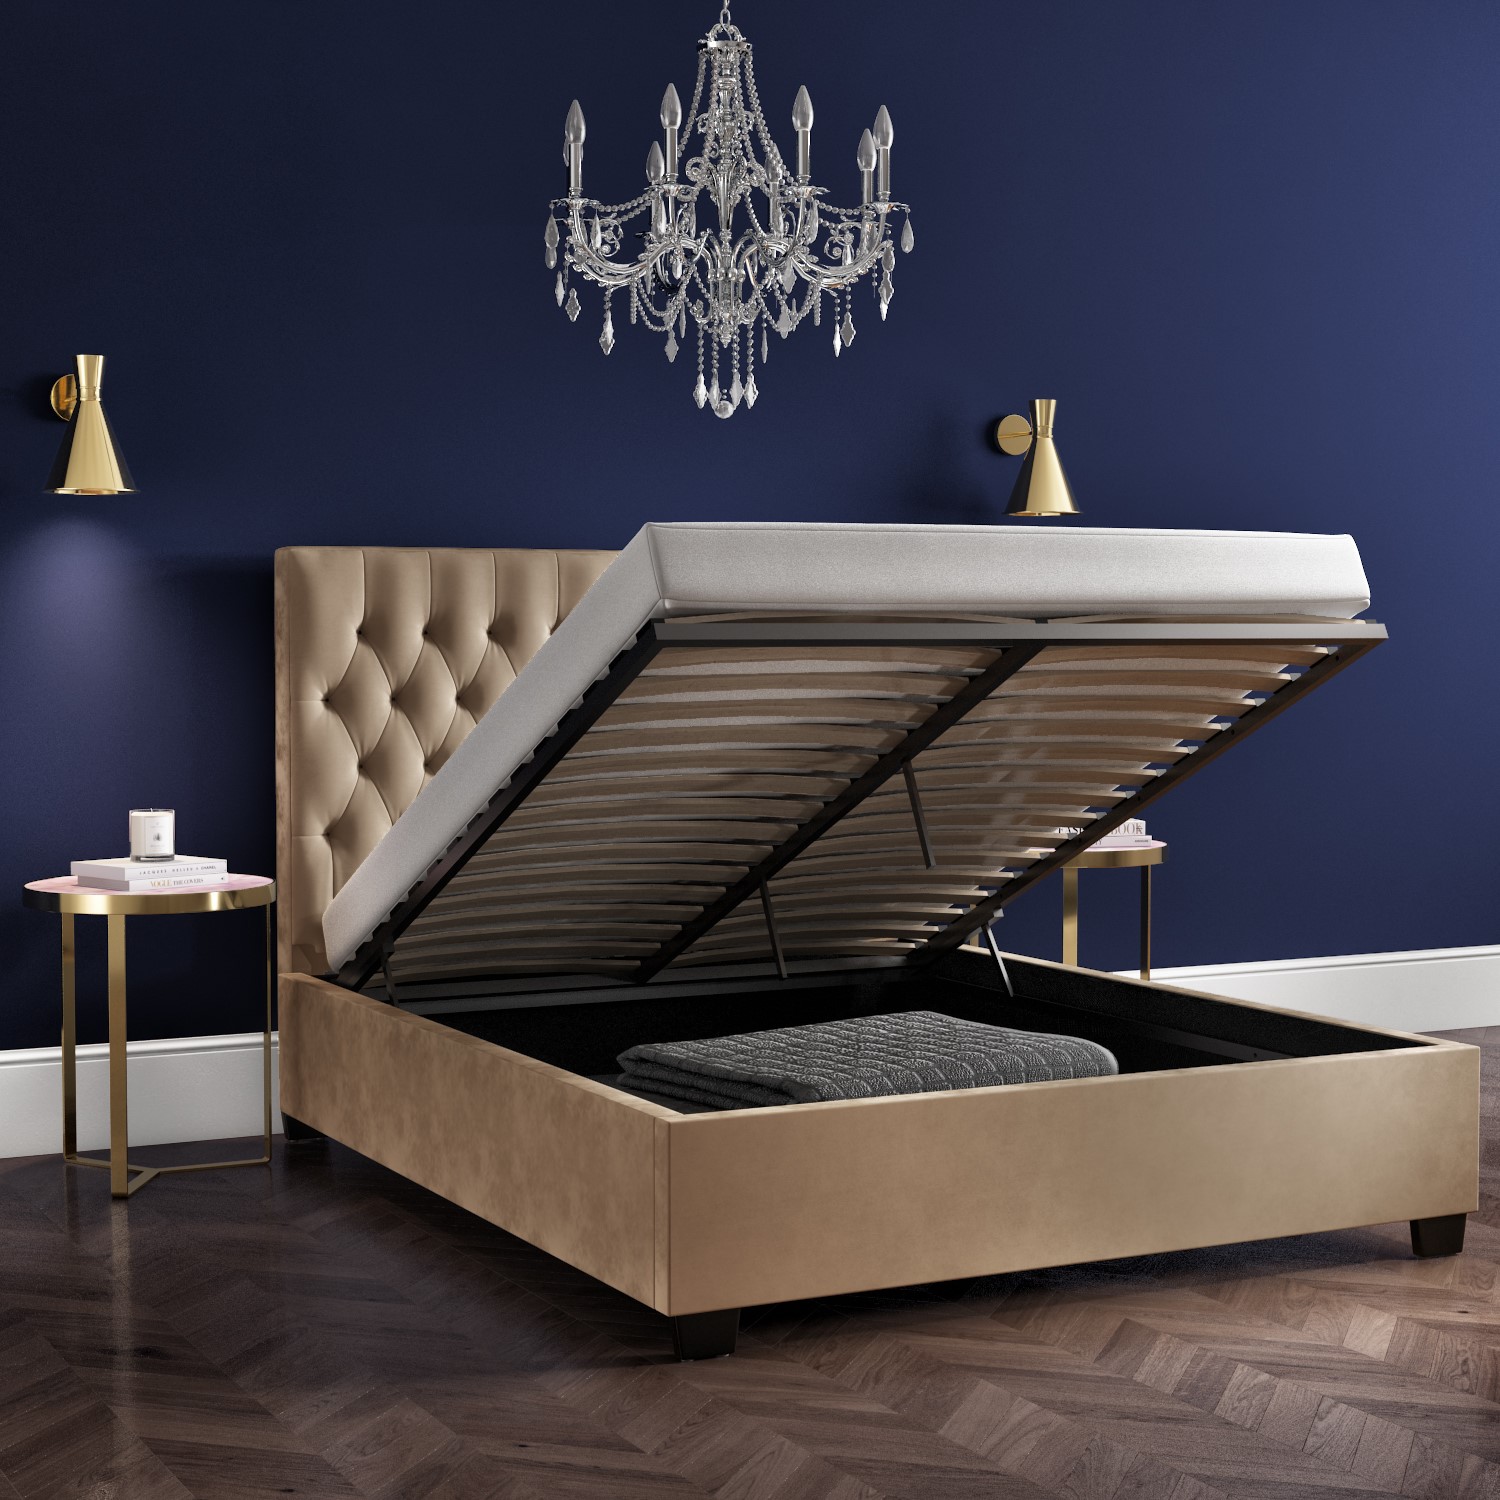 Read more about Beige velvet king size ottoman bed with chesterfield headboard safina